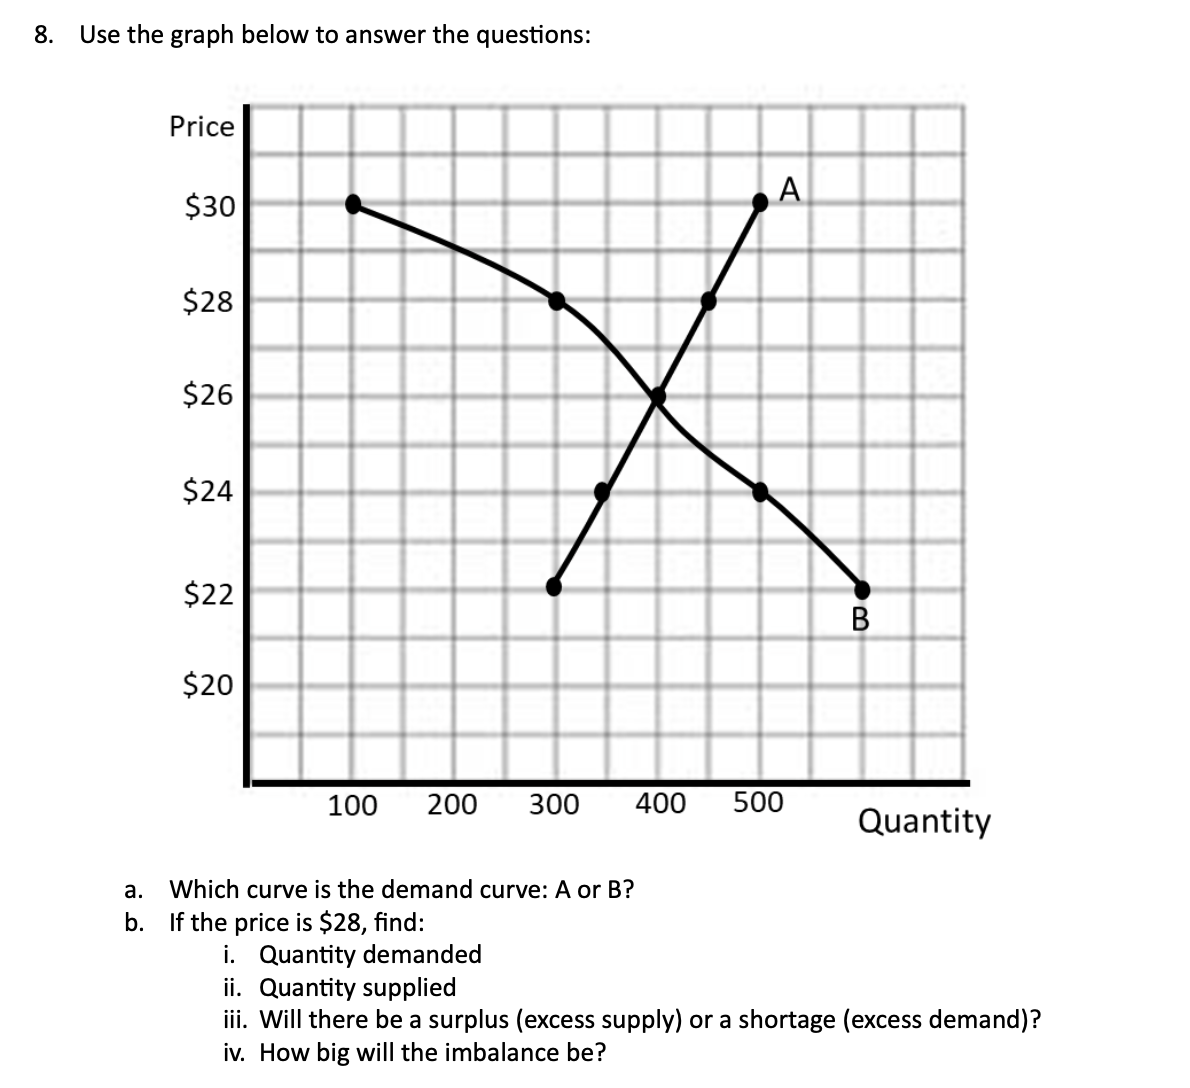 8. Use the graph below to answer the questions:
Price
$30
$28
$26
$24
$22
$20
100 200 300 400 500
a.
Which curve is the demand curve: A or B?
b. If the price is $28, find:
A
i. Quantity demanded
B
Quantity
ii. Quantity supplied
iii. Will there be a surplus (excess supply) or a shortage (excess demand)?
iv. How big will the imbalance be?